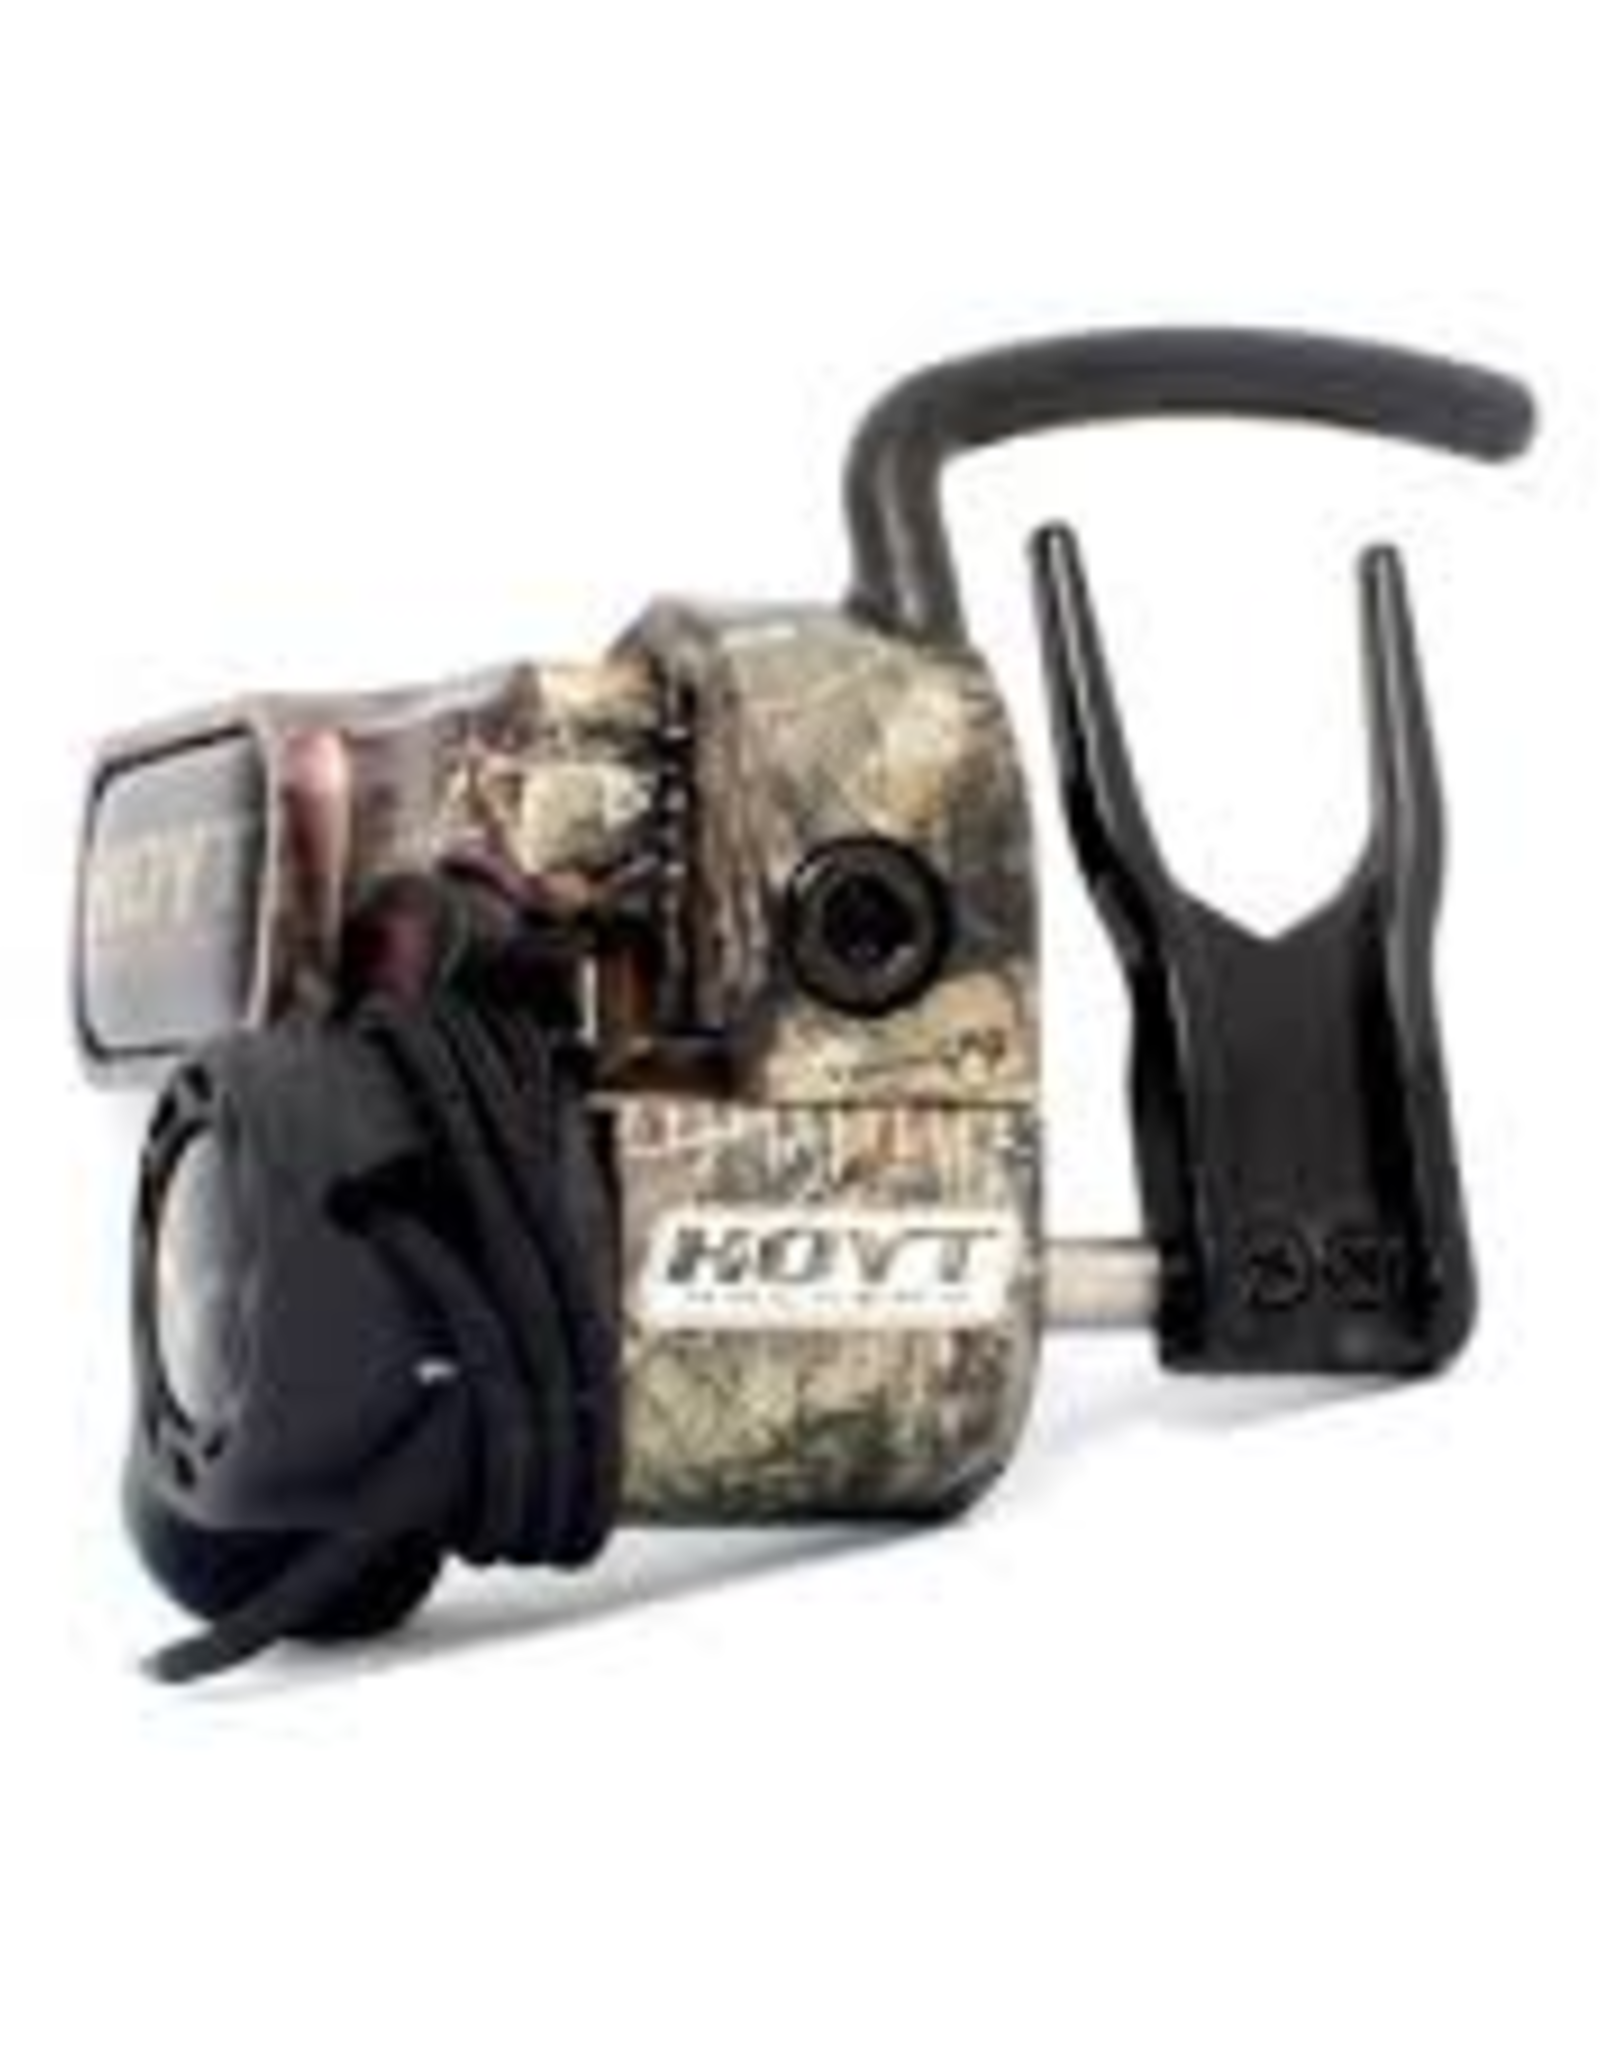 HOYT Fall-Away Ultra Rest Realtree LH